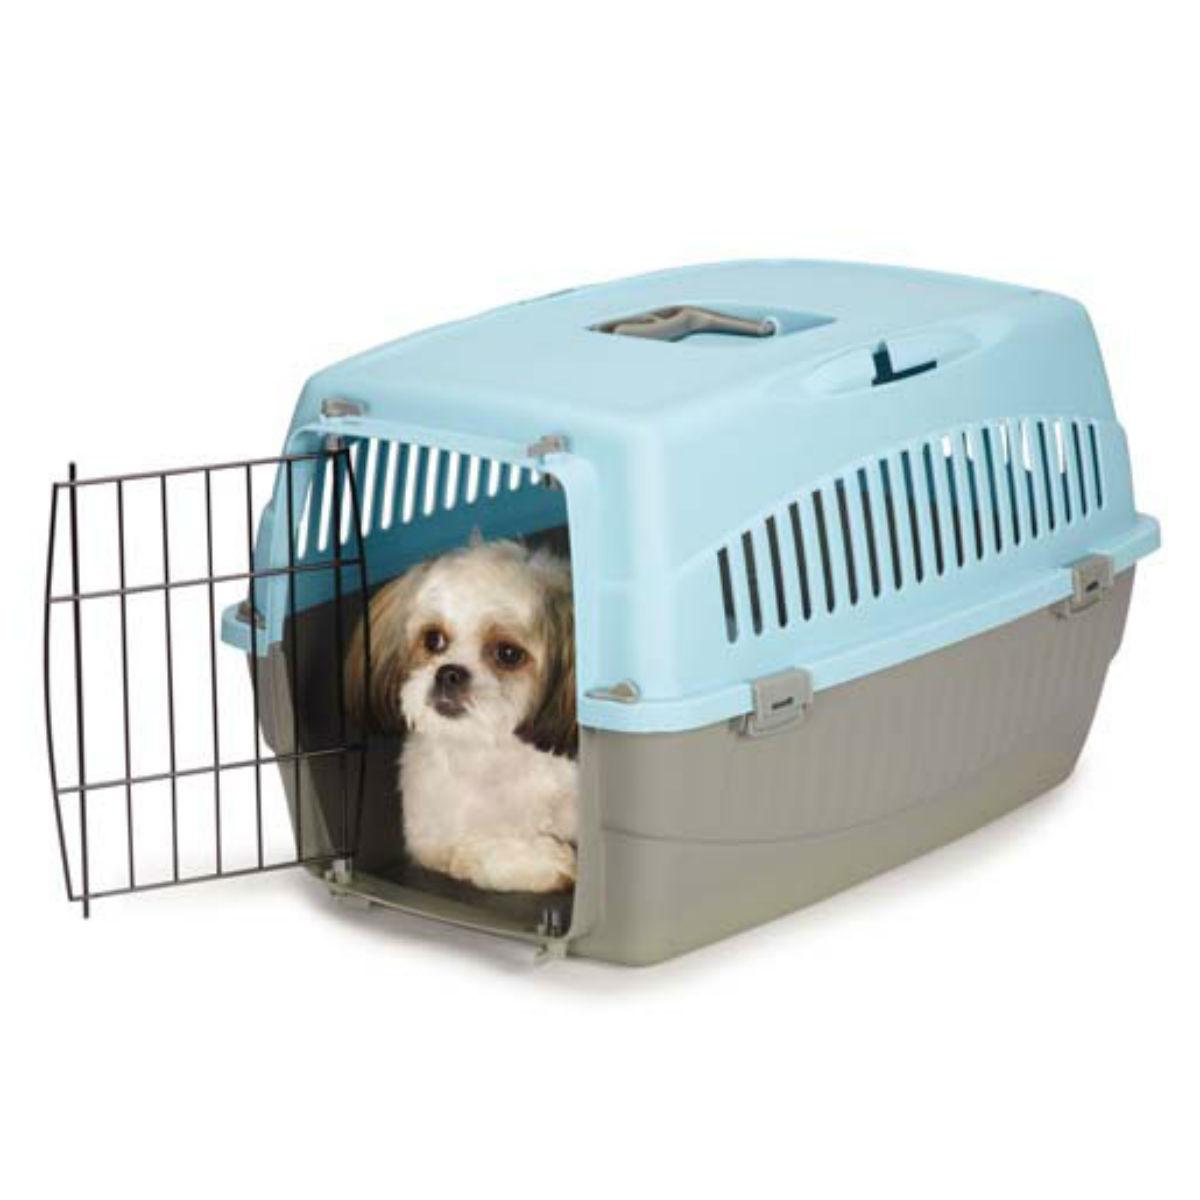 Cruising Companion Carry-Me Dog Crate - Bluebell